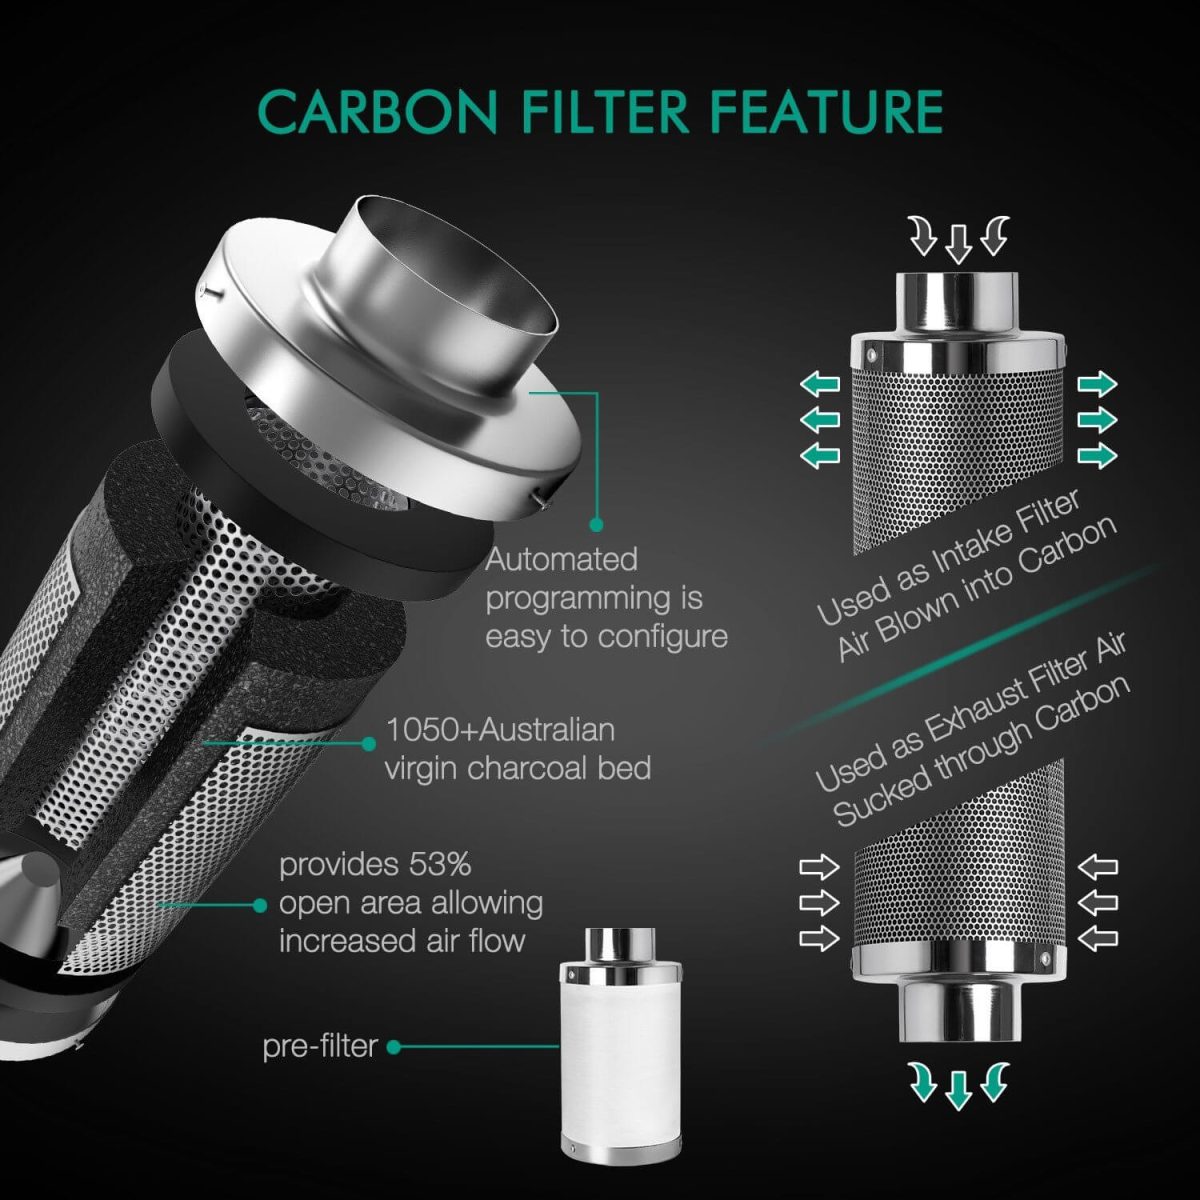 The carbon filter in the grow kit is built with 53% more open areas and 1050+ Australian virgin charcoal.